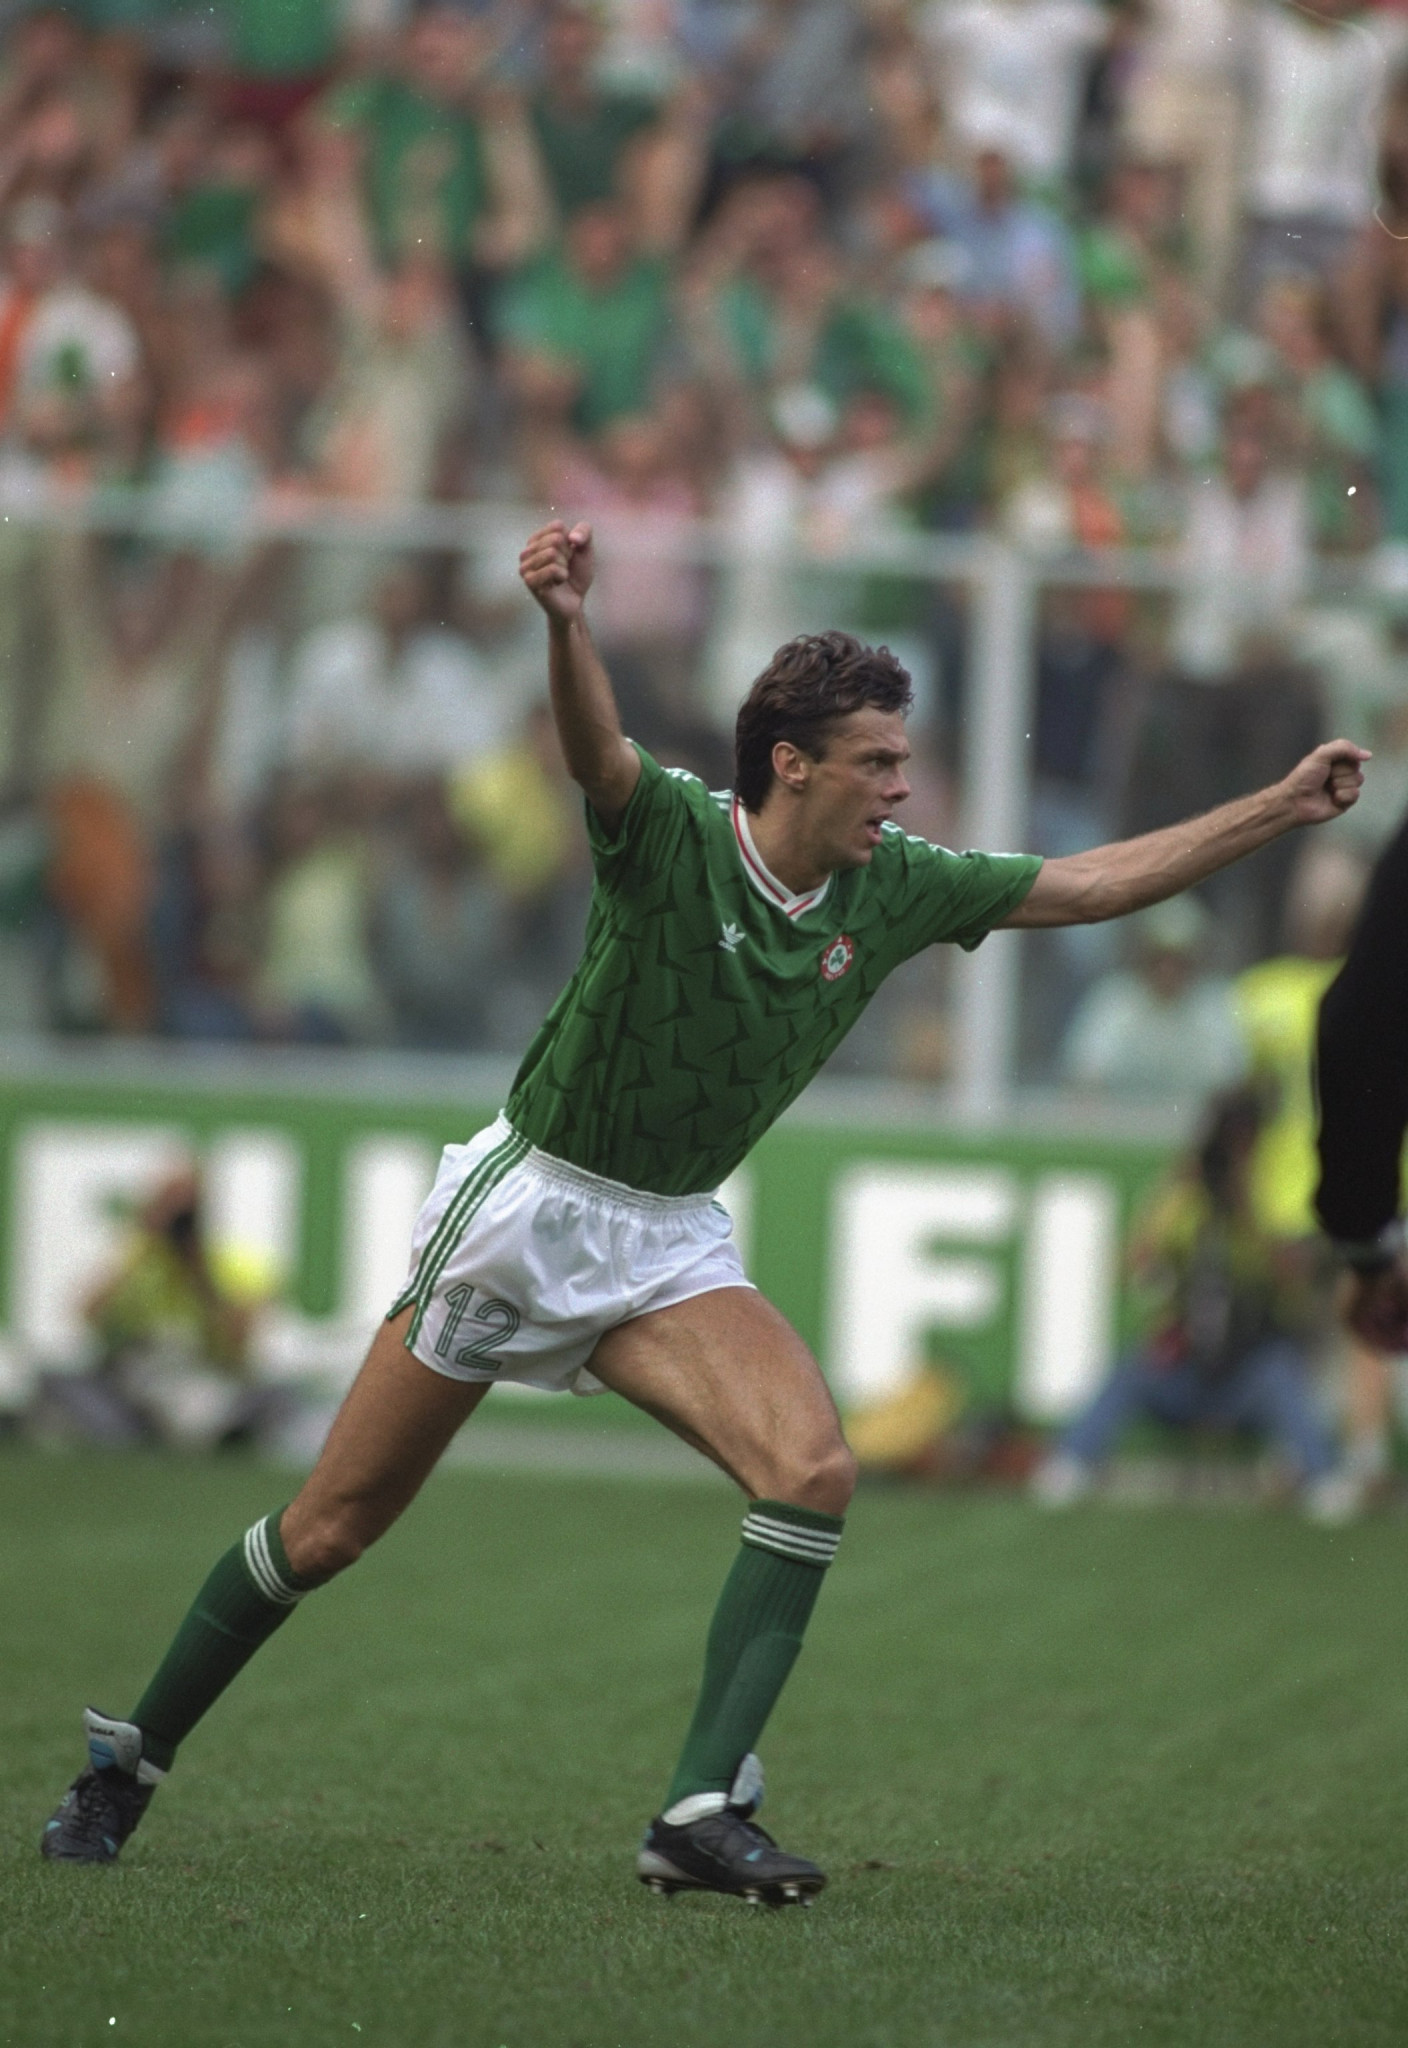 David O'Leary turned out to be the unlikely hero when he scored the winning penalty in a shootout against Romania at the 1990 FIFA World Cup in Italy on Ireland's debut at the tournament ©Getty Images